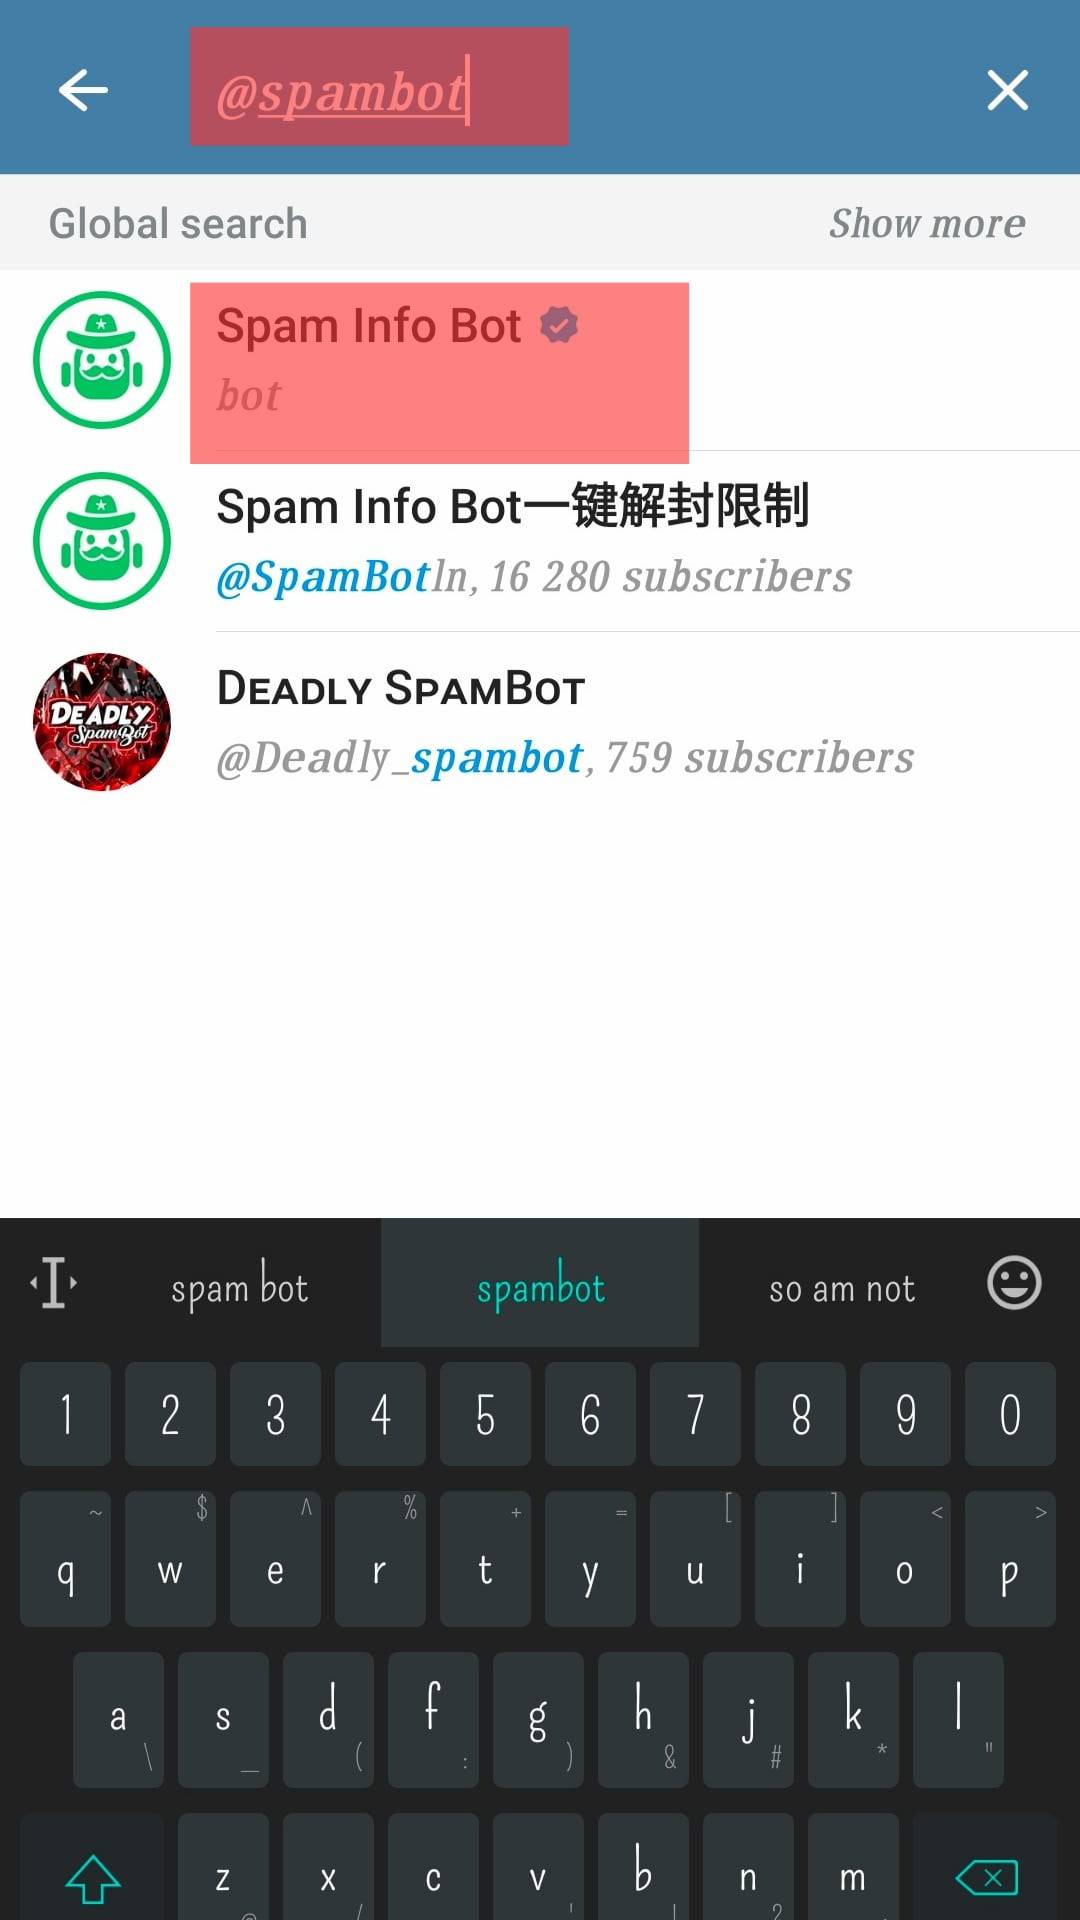 Search For Spambot